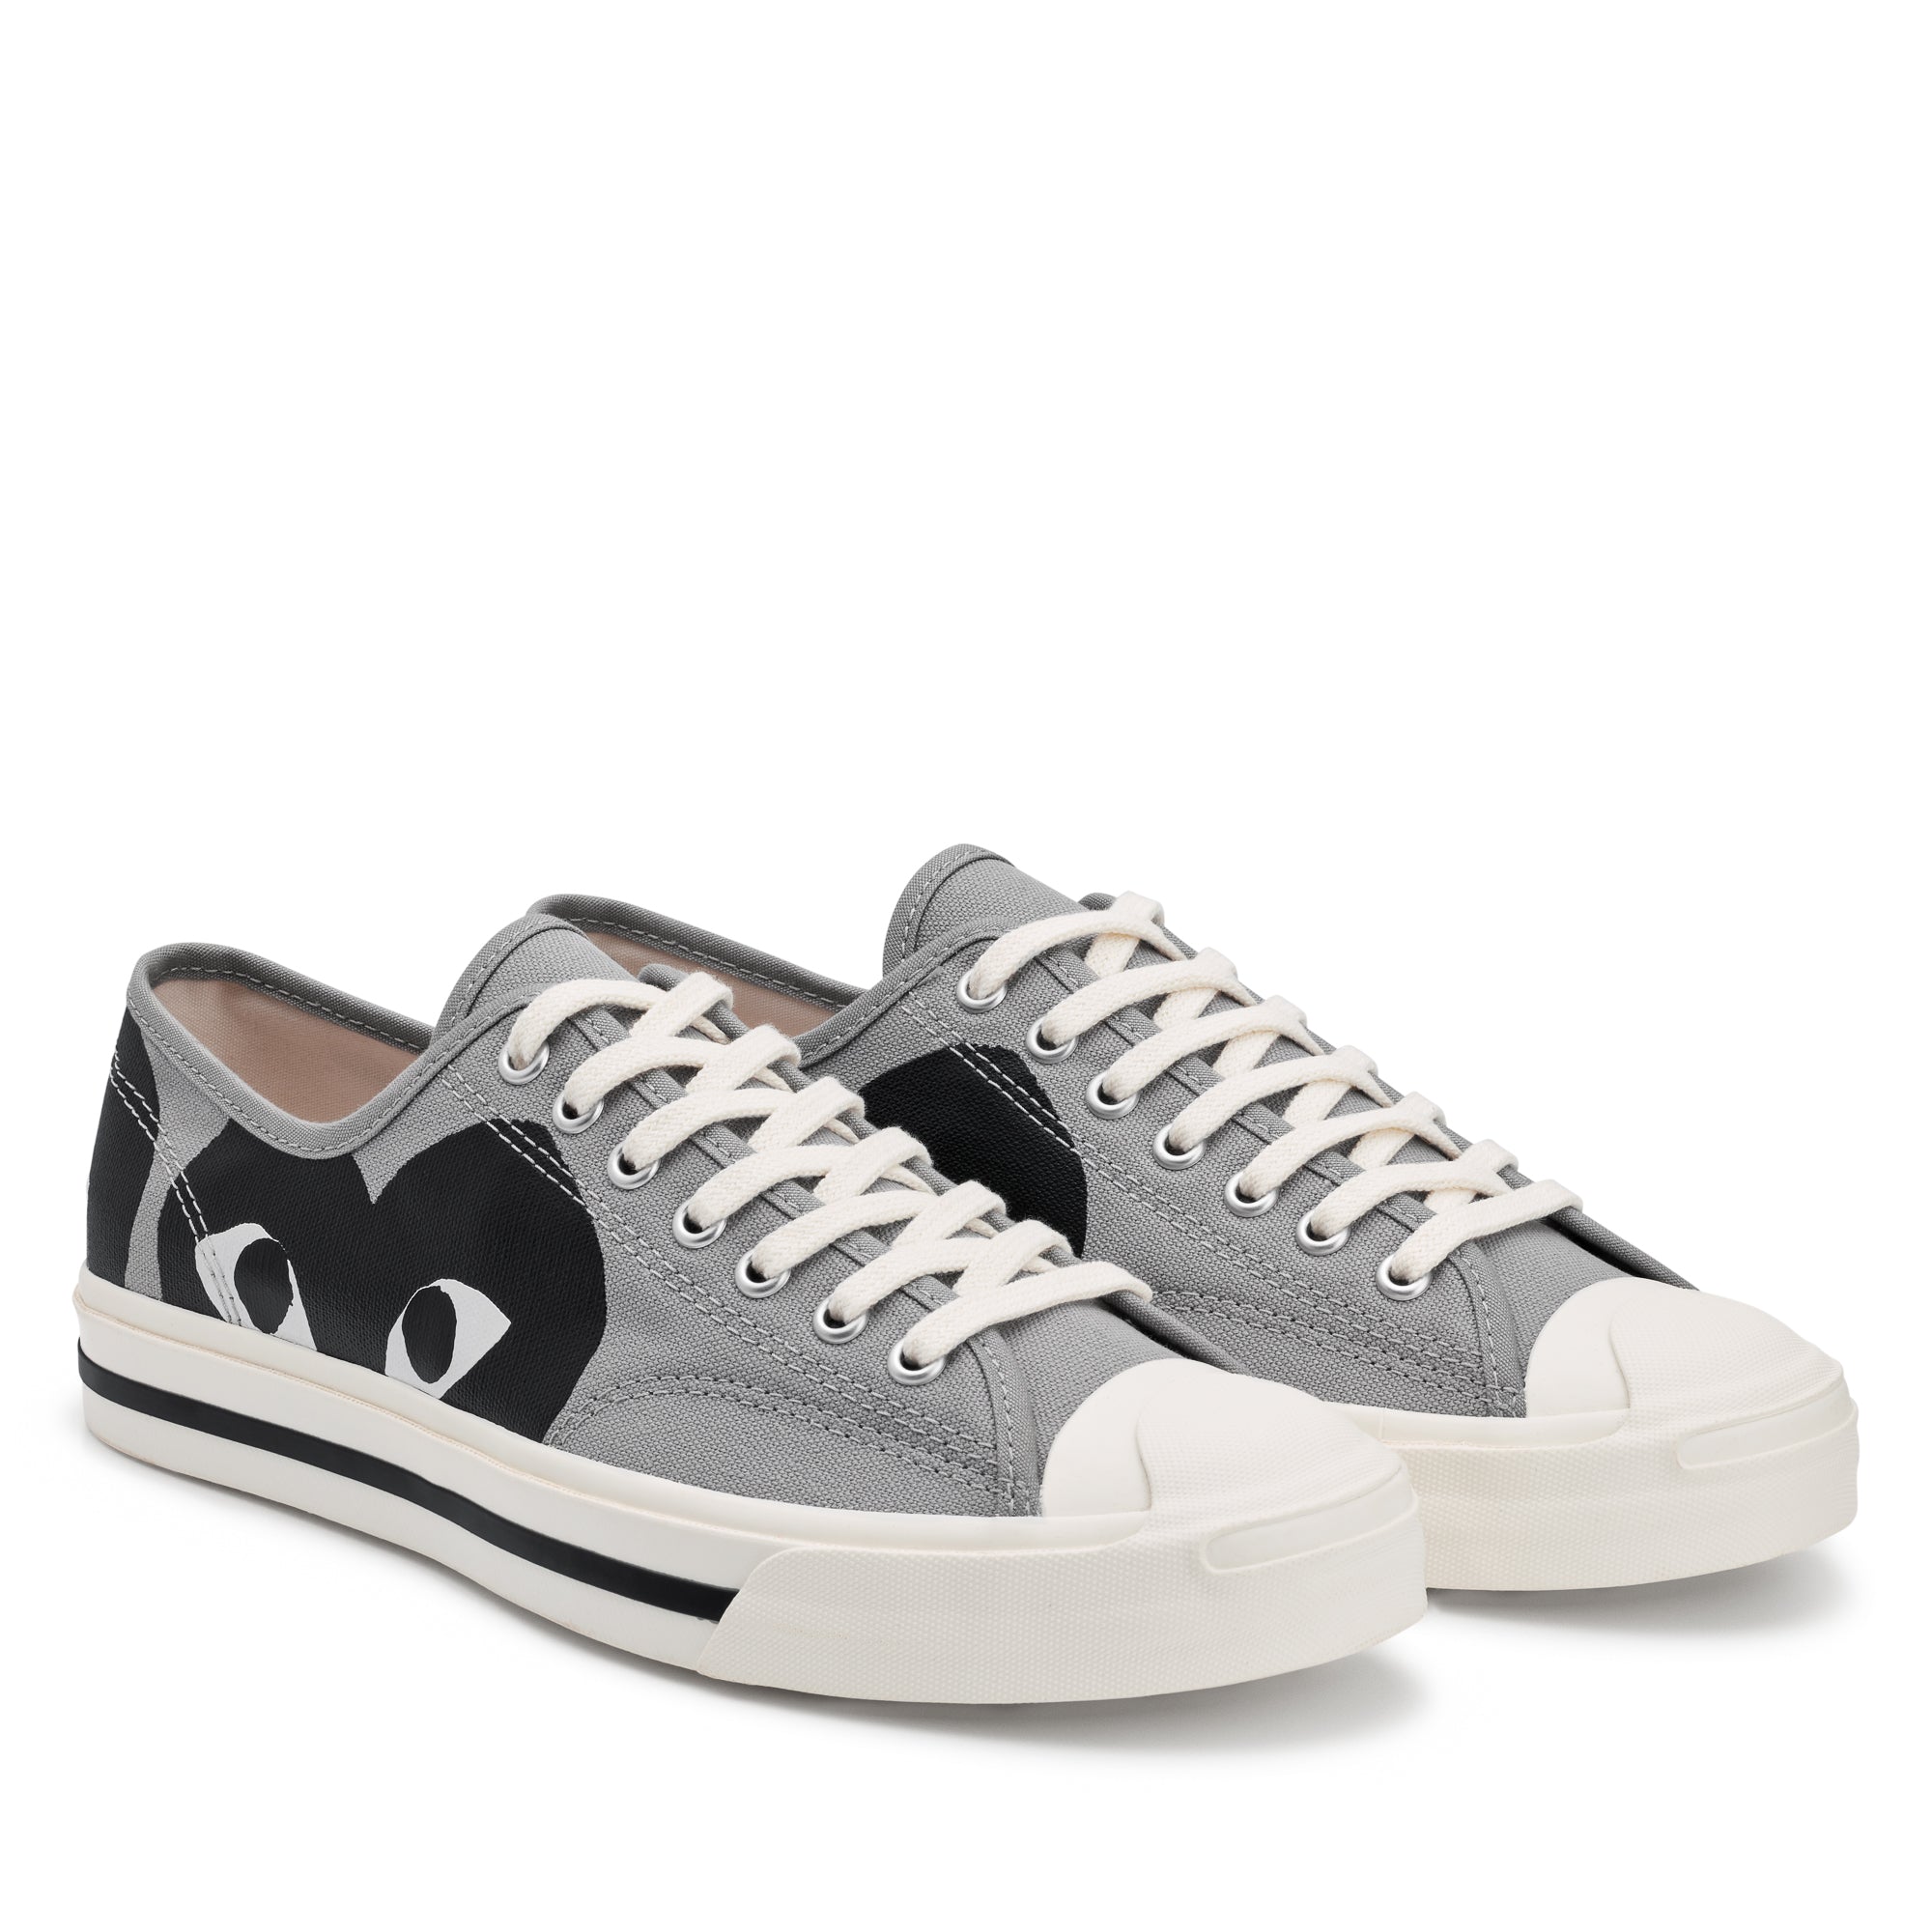 PLAY CONVERSE - Jack Purcell - (Black) view 3